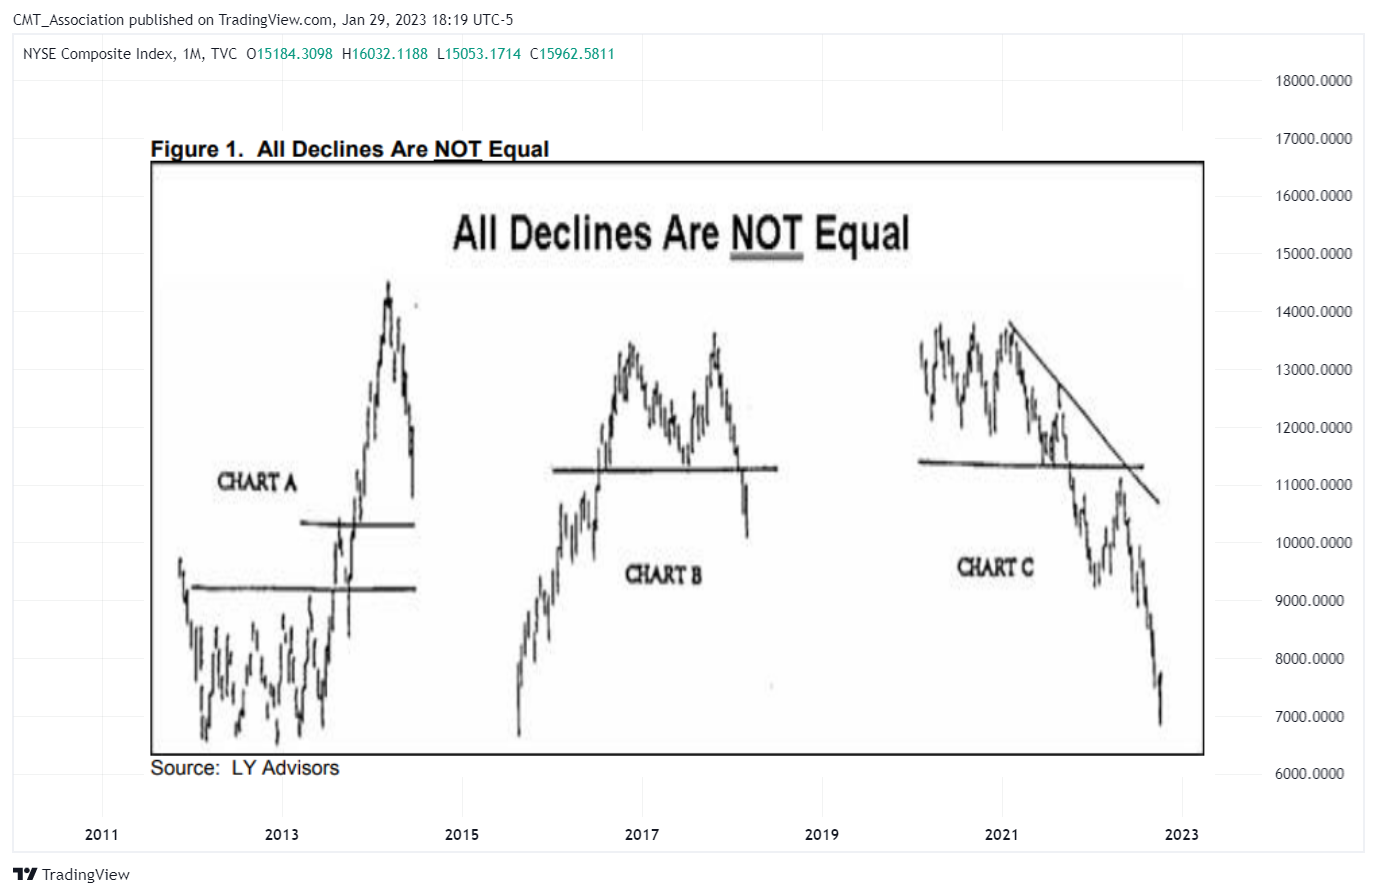 All Declines Are Not Equal - 2023